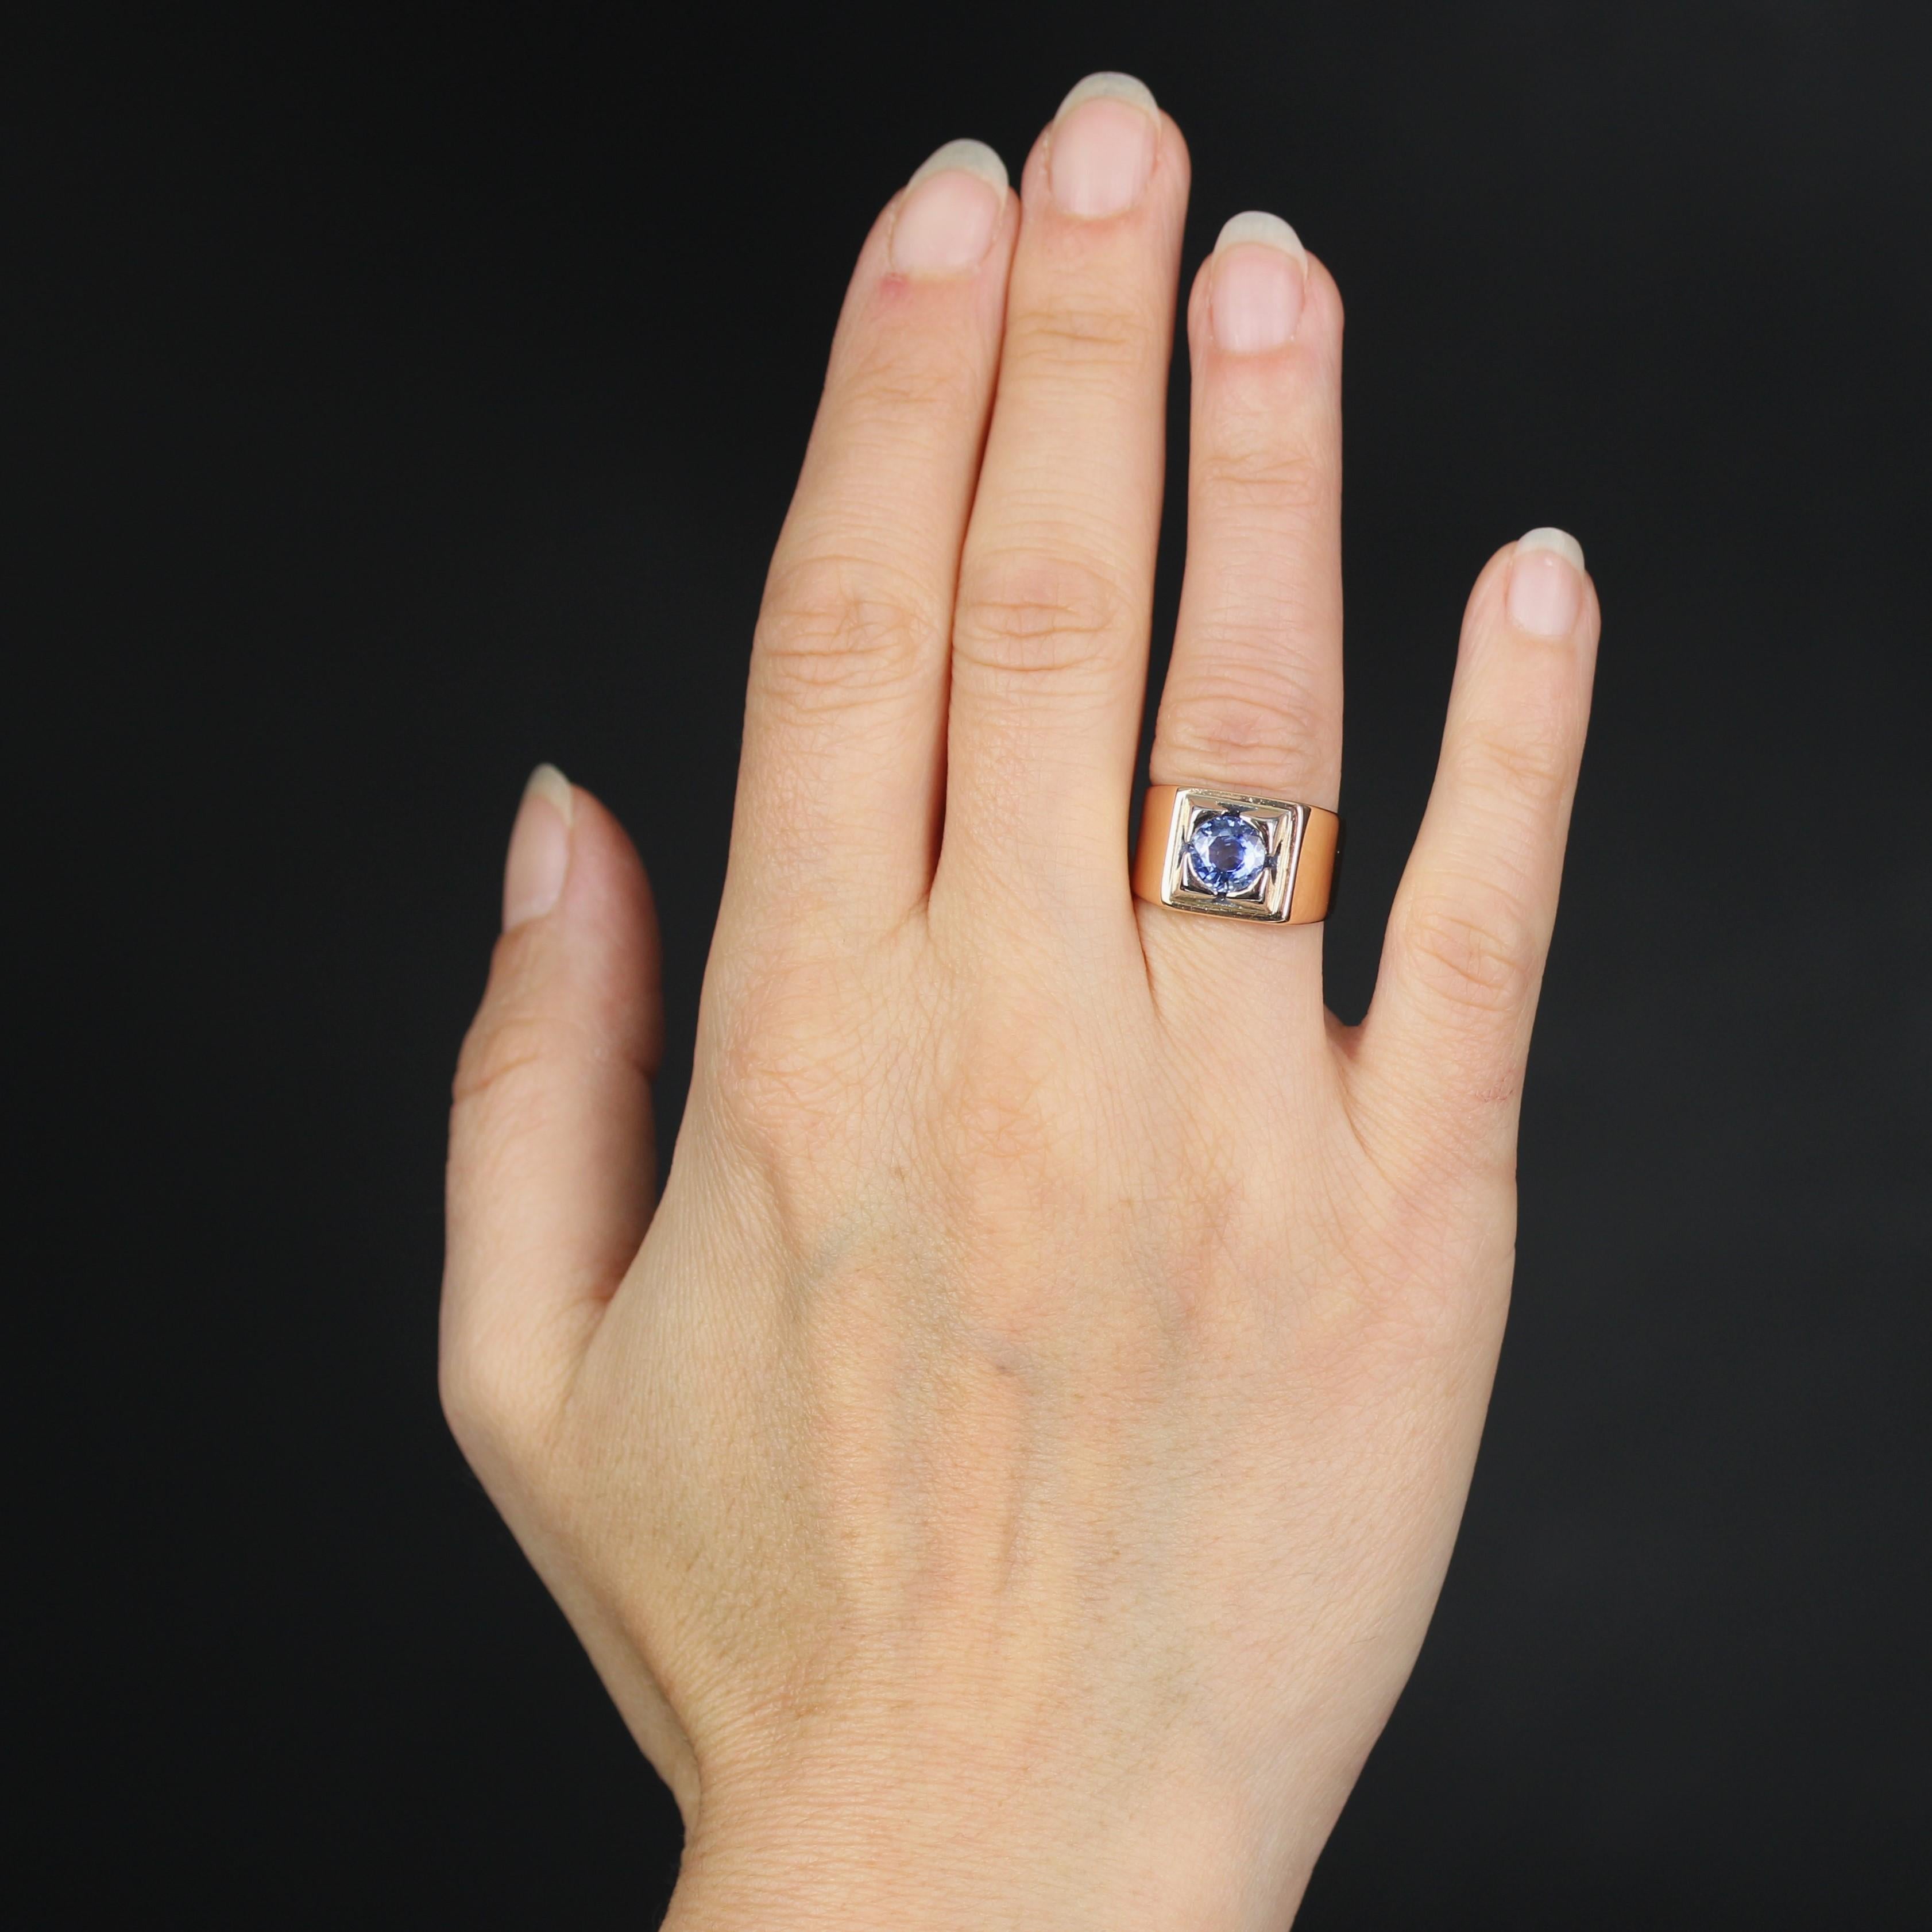 Ring in 18 karat yellow gold and platinum.
This magnificent signet ring features a wide, flat band adorned with an intense light-blue sapphire.
Total weight of the sapphire : 1,18 carat approximately.
Height : 10.8 mm approximately, width : 9.5 mm